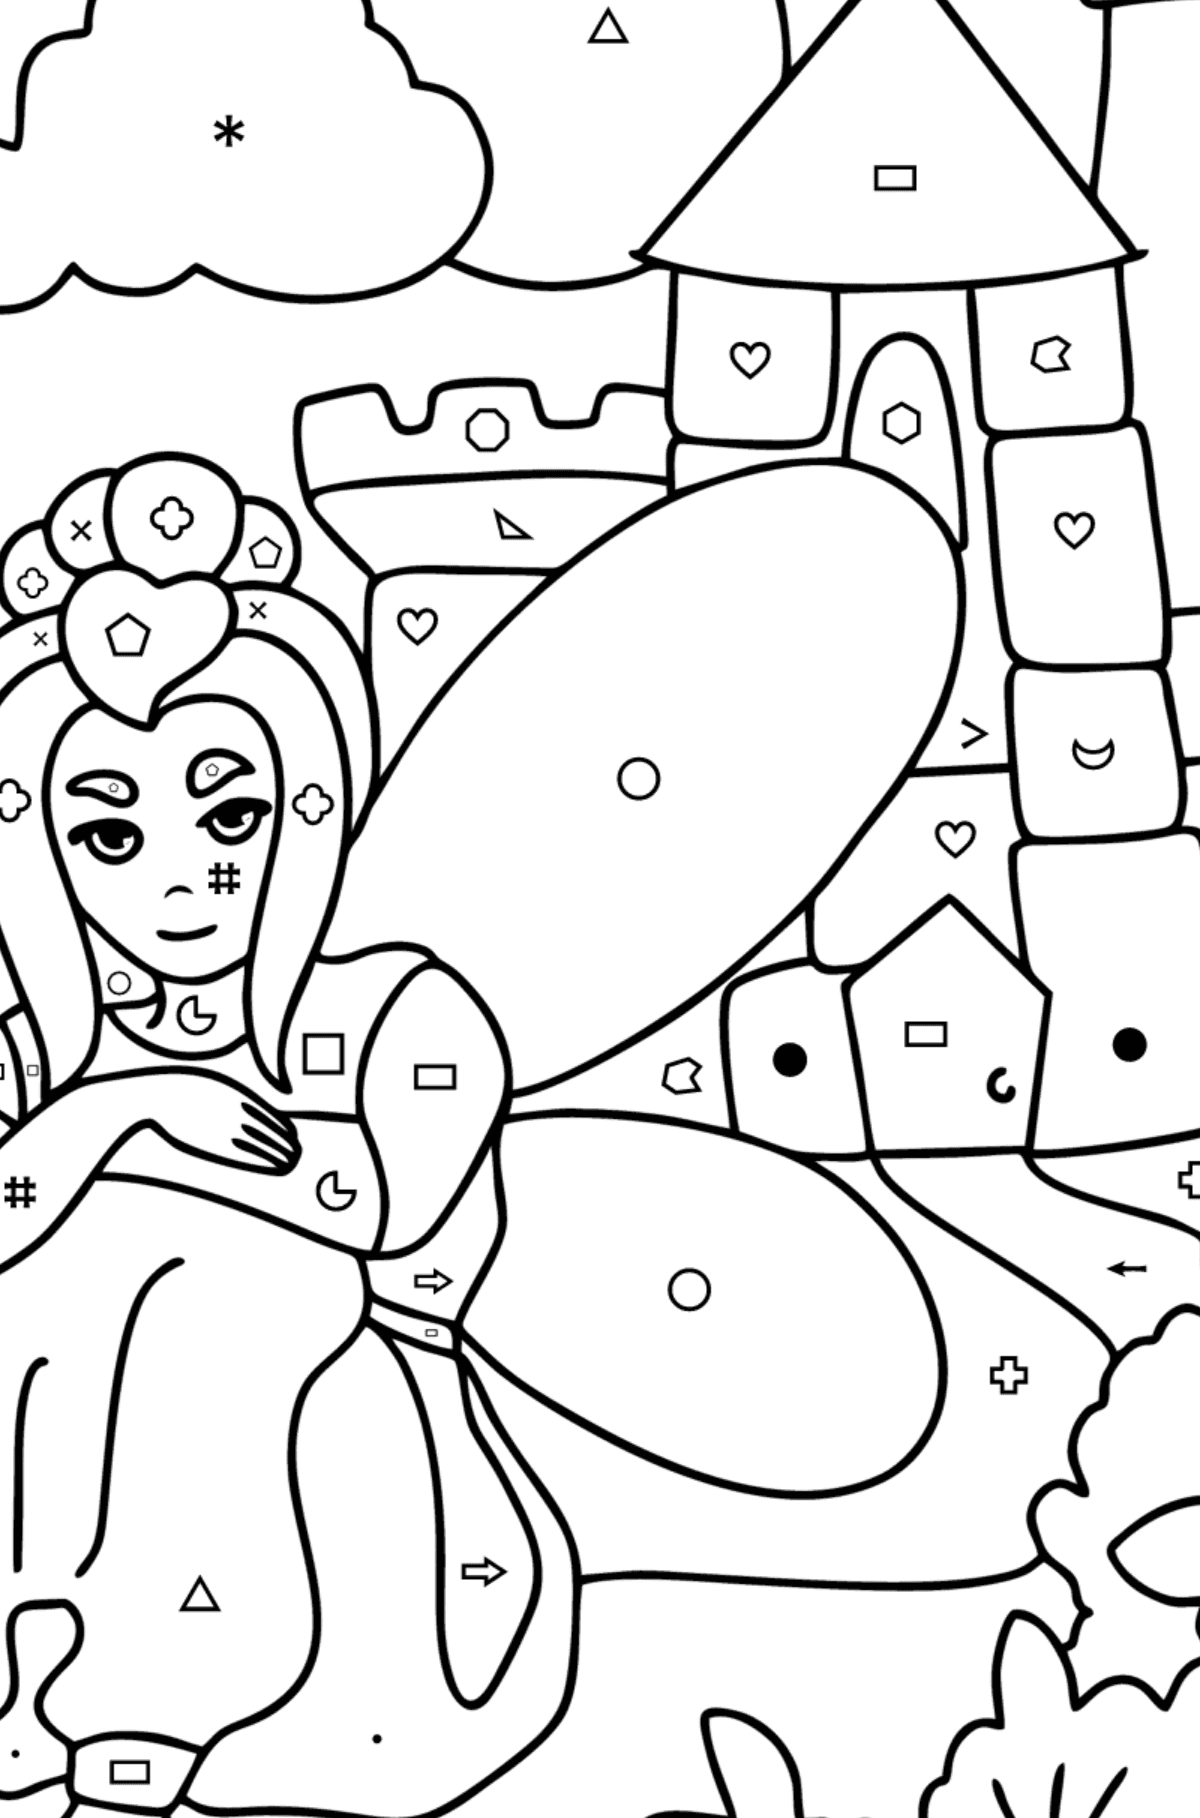 Fairy at the castle coloring page - Coloring by Symbols and Geometric Shapes for Kids